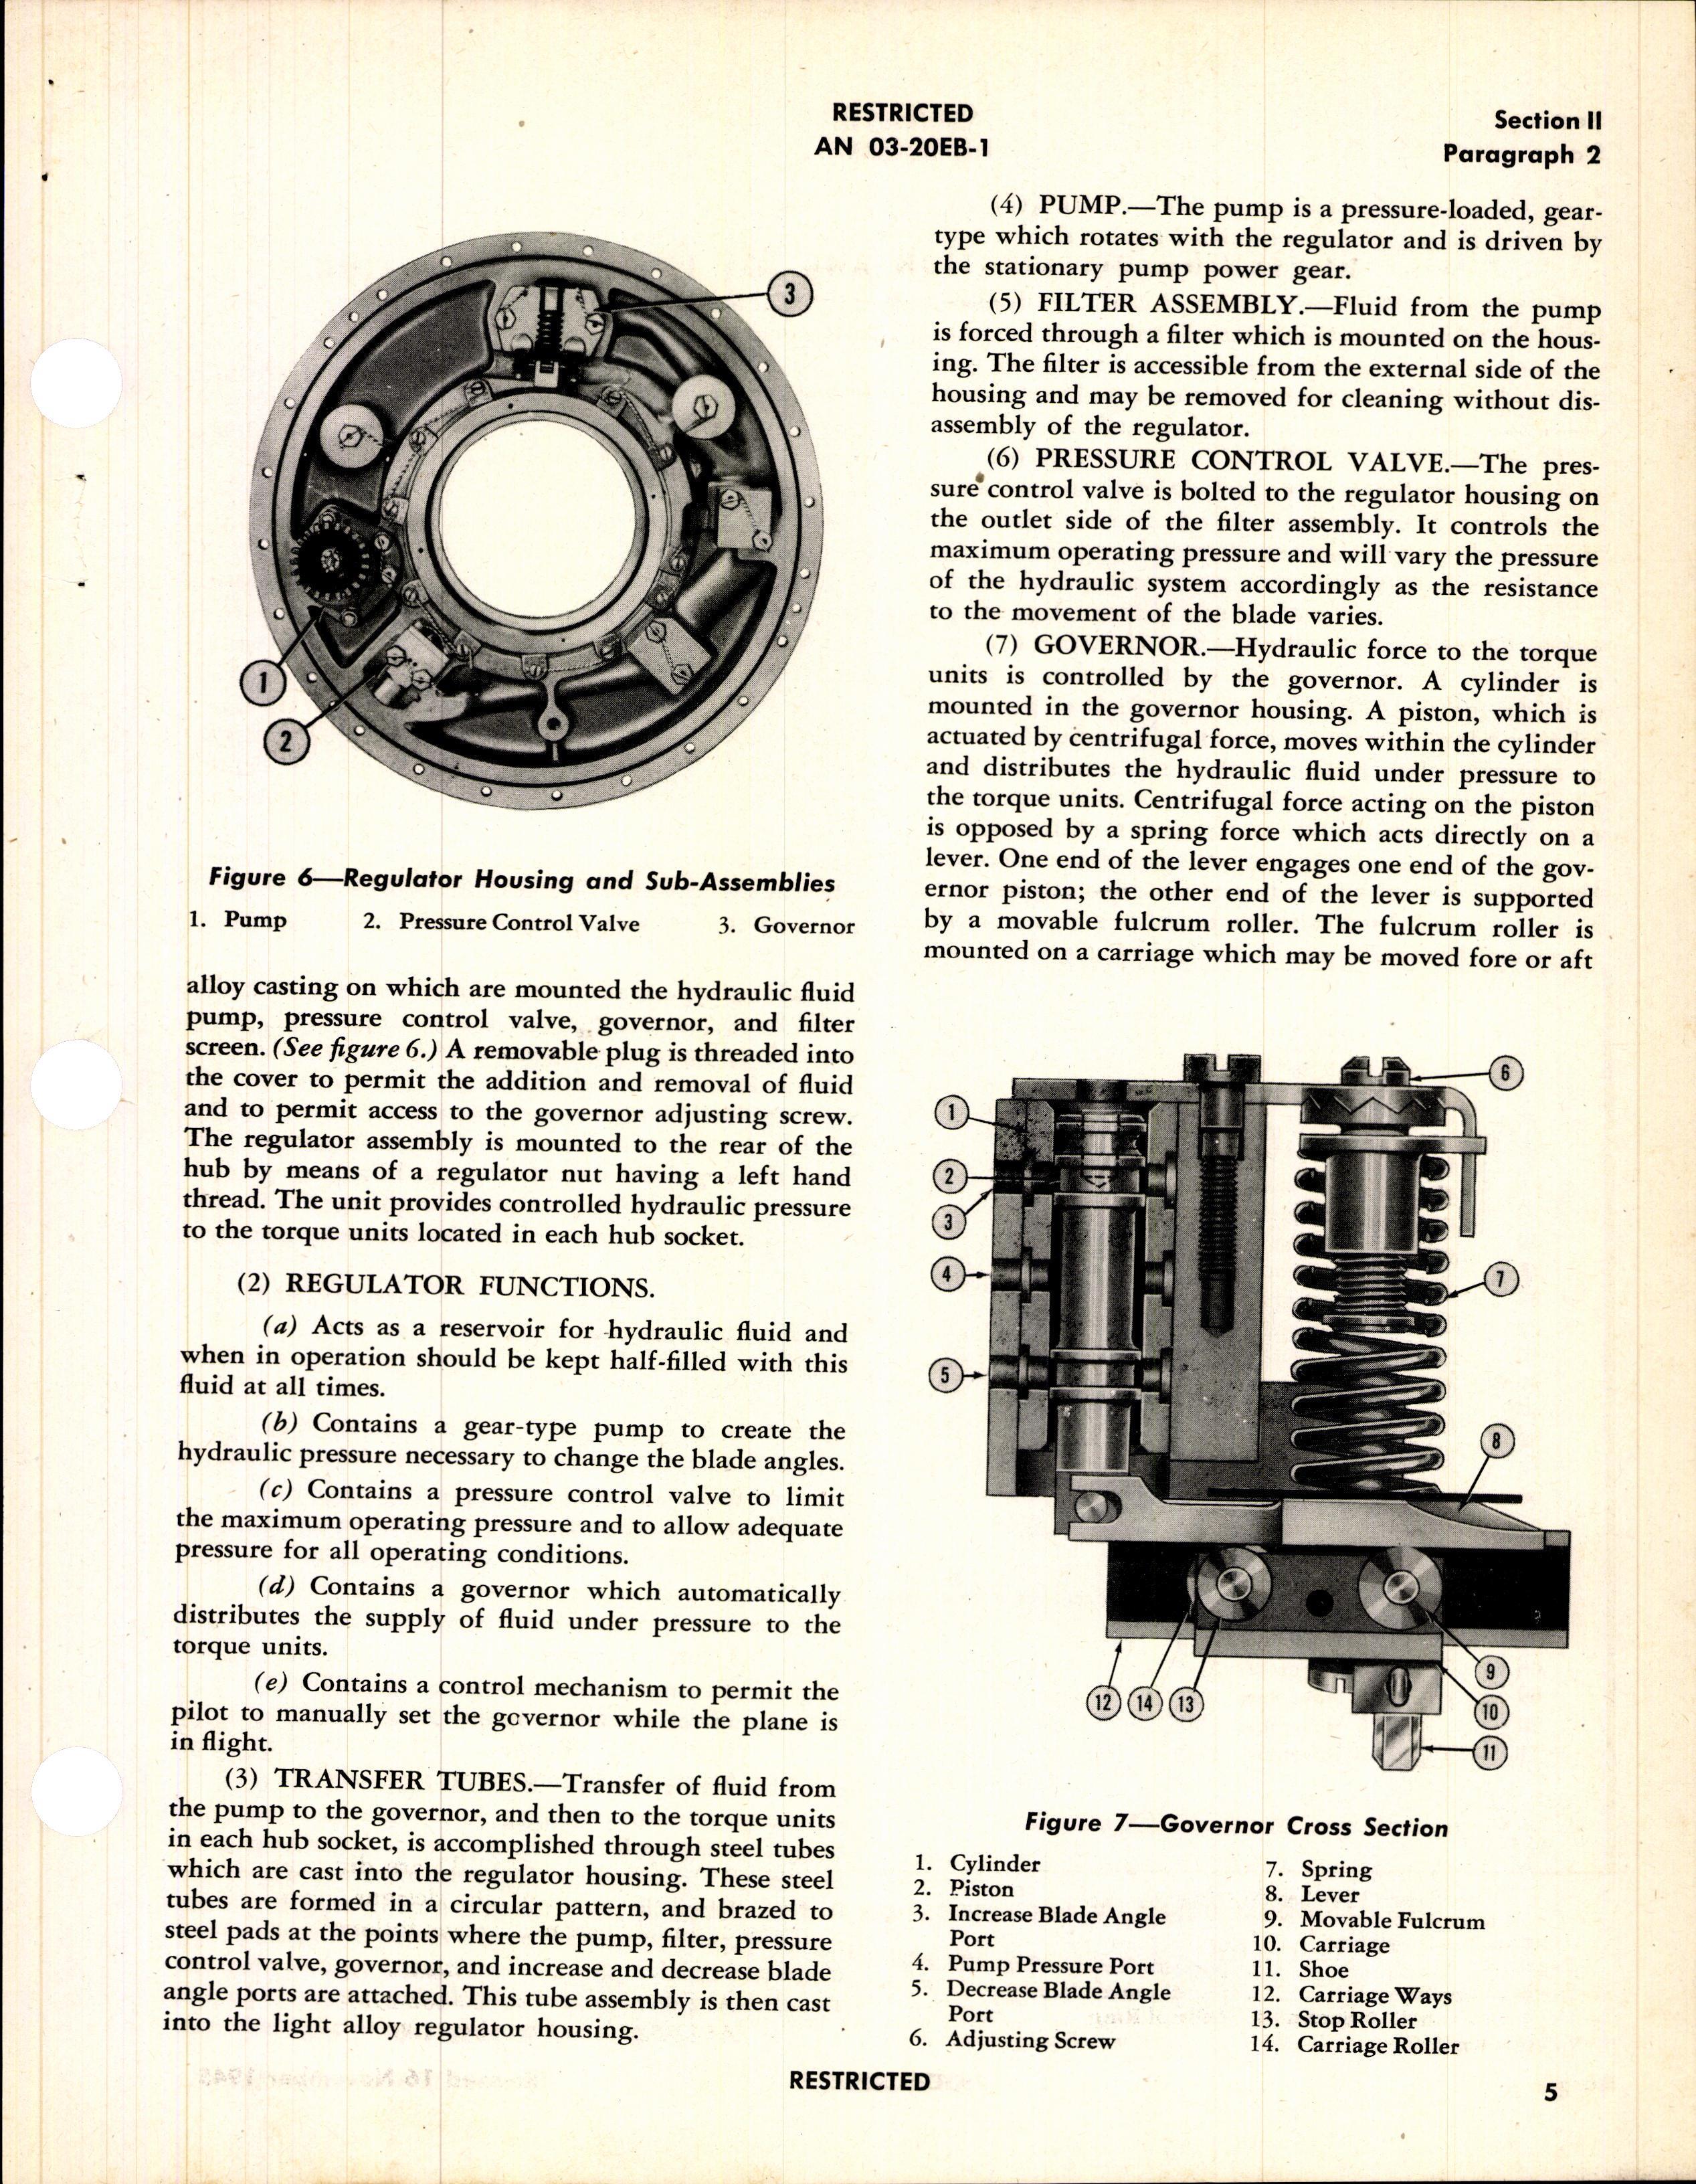 Sample page 5 from AirCorps Library document: Operation, Service, & Overhaul Instructions with Parts Catalog for Hydraulic Controllable Propellers